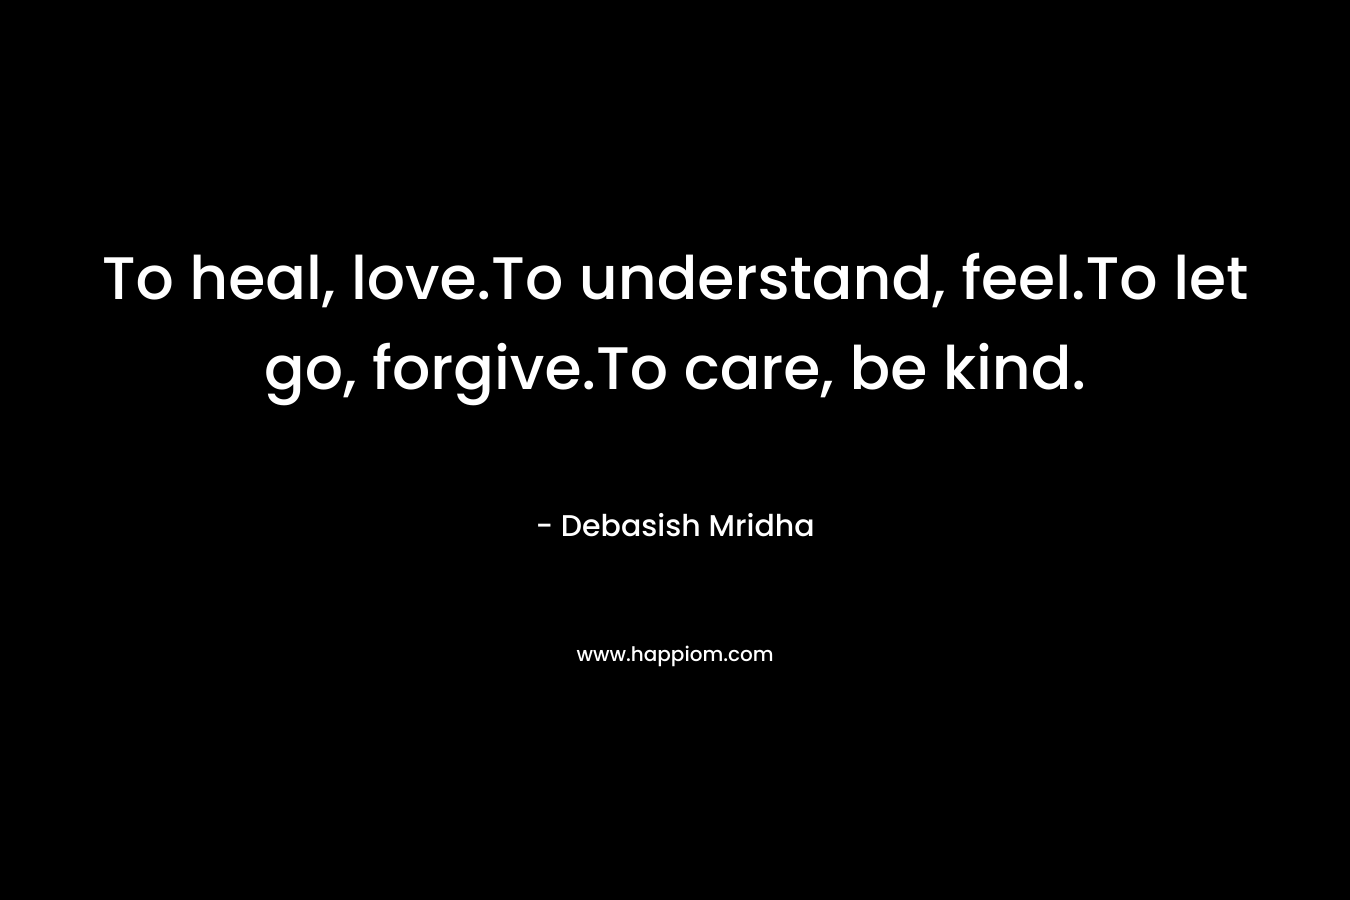 To heal, love.To understand, feel.To let go, forgive.To care, be kind. – Debasish Mridha